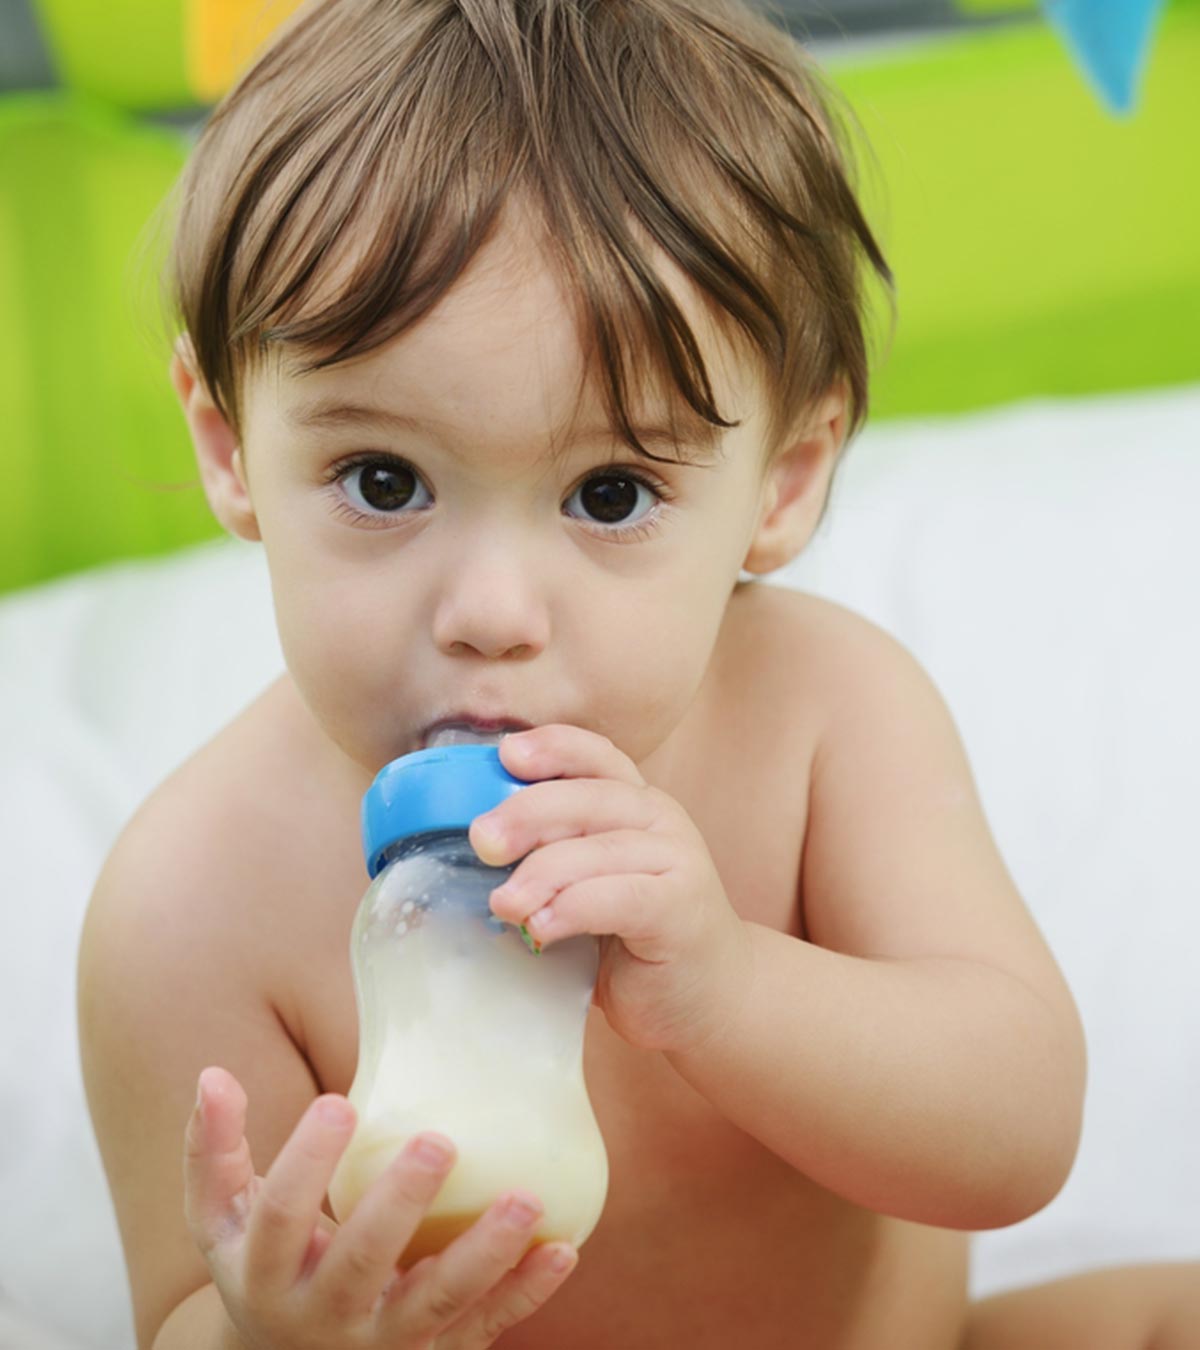 When Should Babies Transition From Formula Milk?